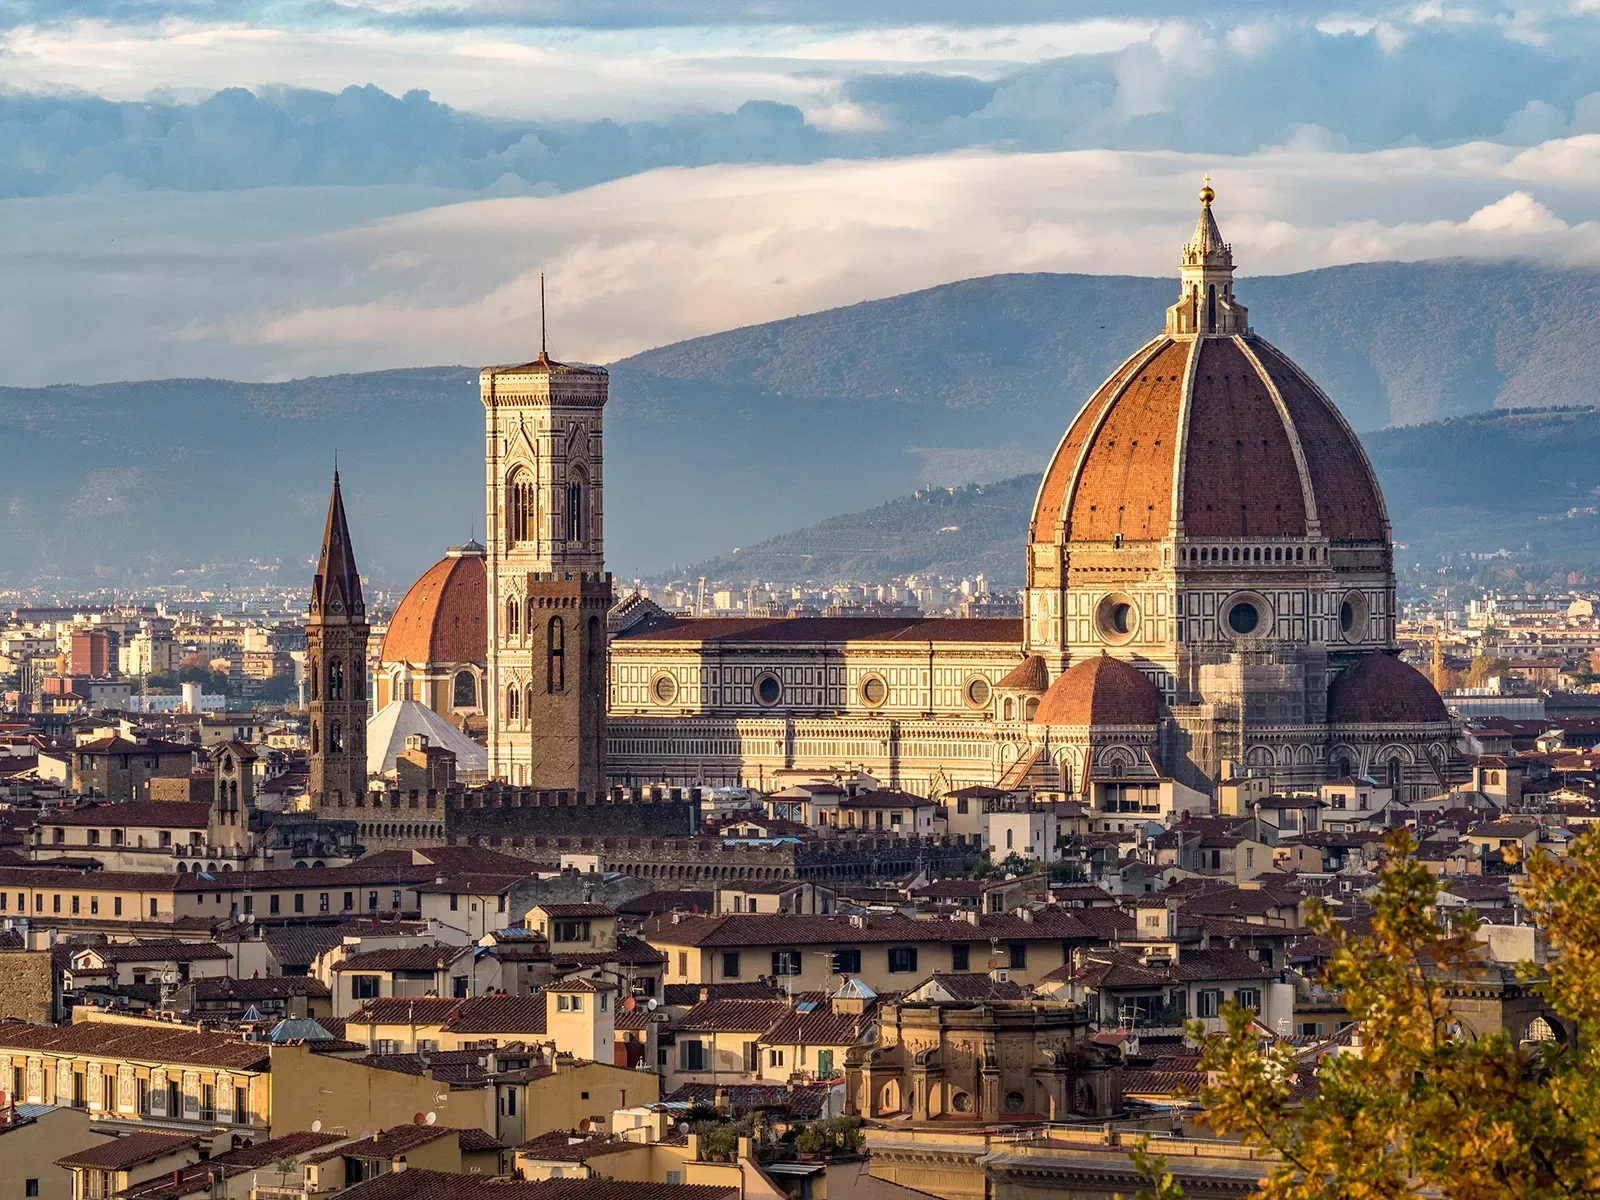 Wide shot of Brunelleschi's dome and it's surrounding city.